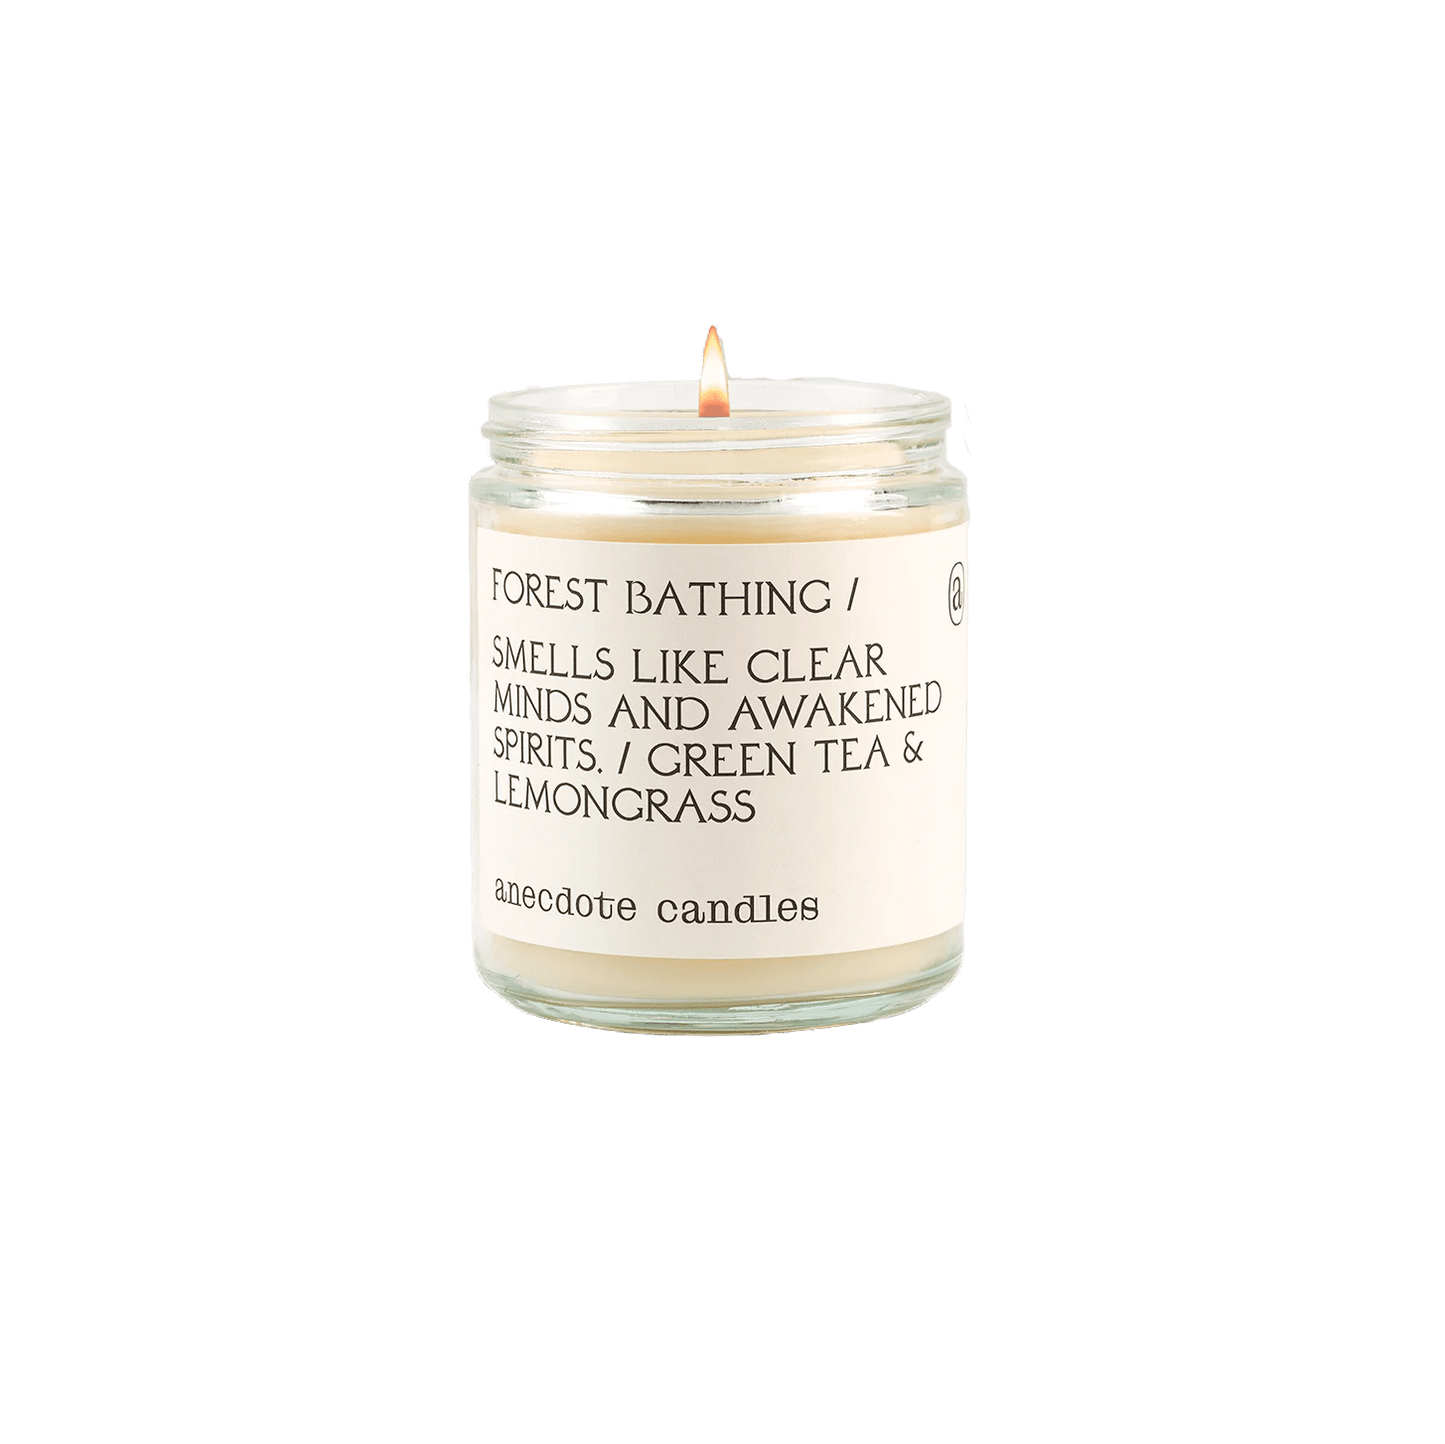 Build Your Own Custom Anecdote Candle